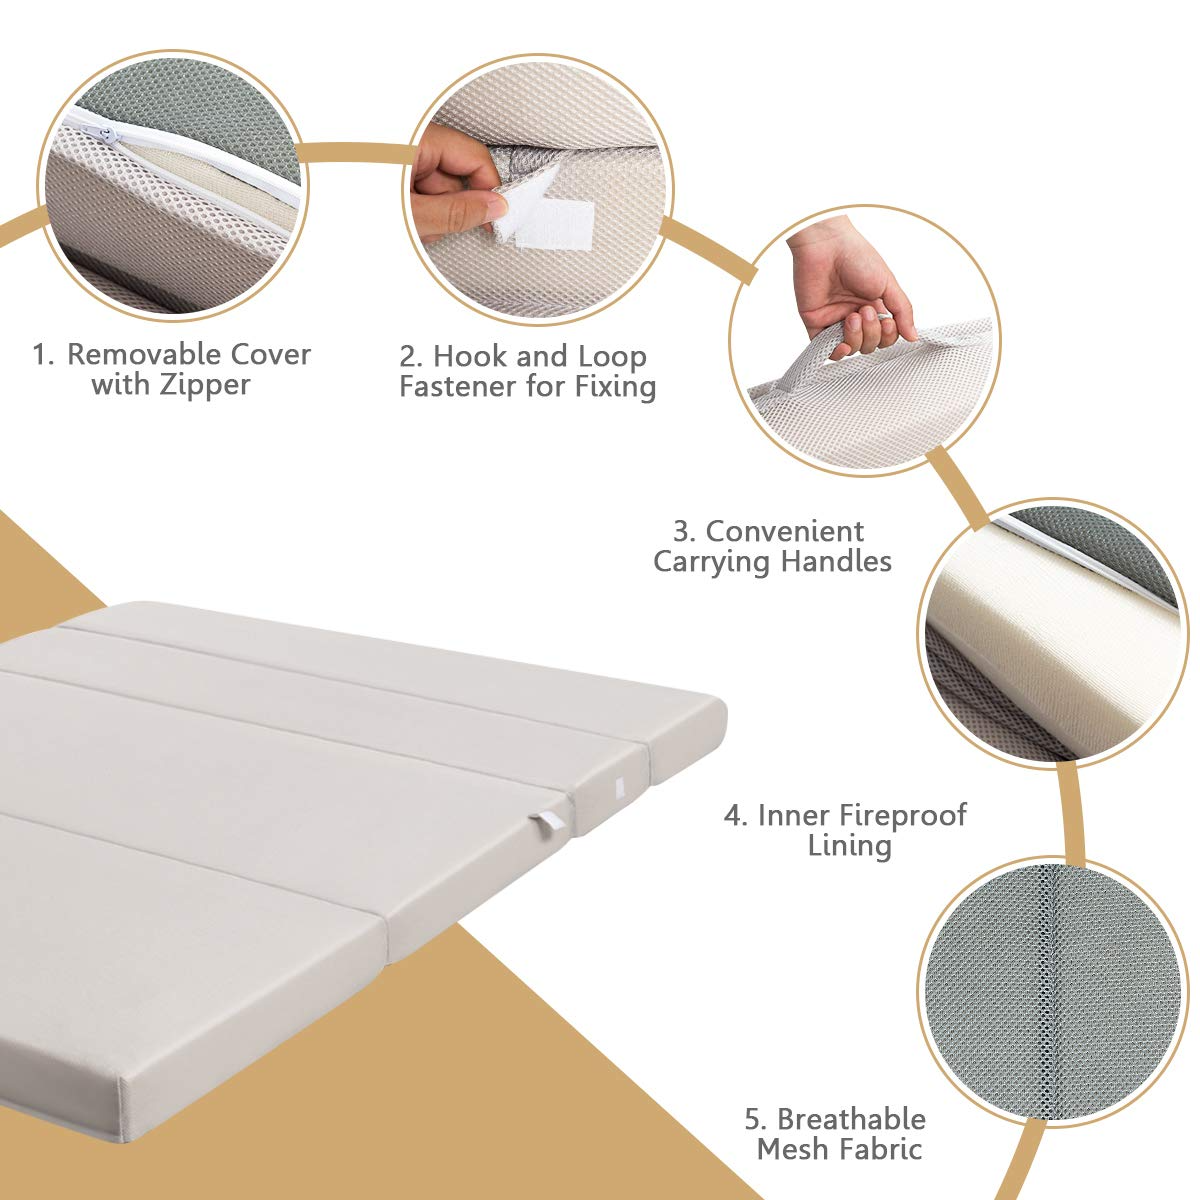 Giantex 4" Thick Folding Portable Mattress Pad Sofa Bed with Carrying Handles